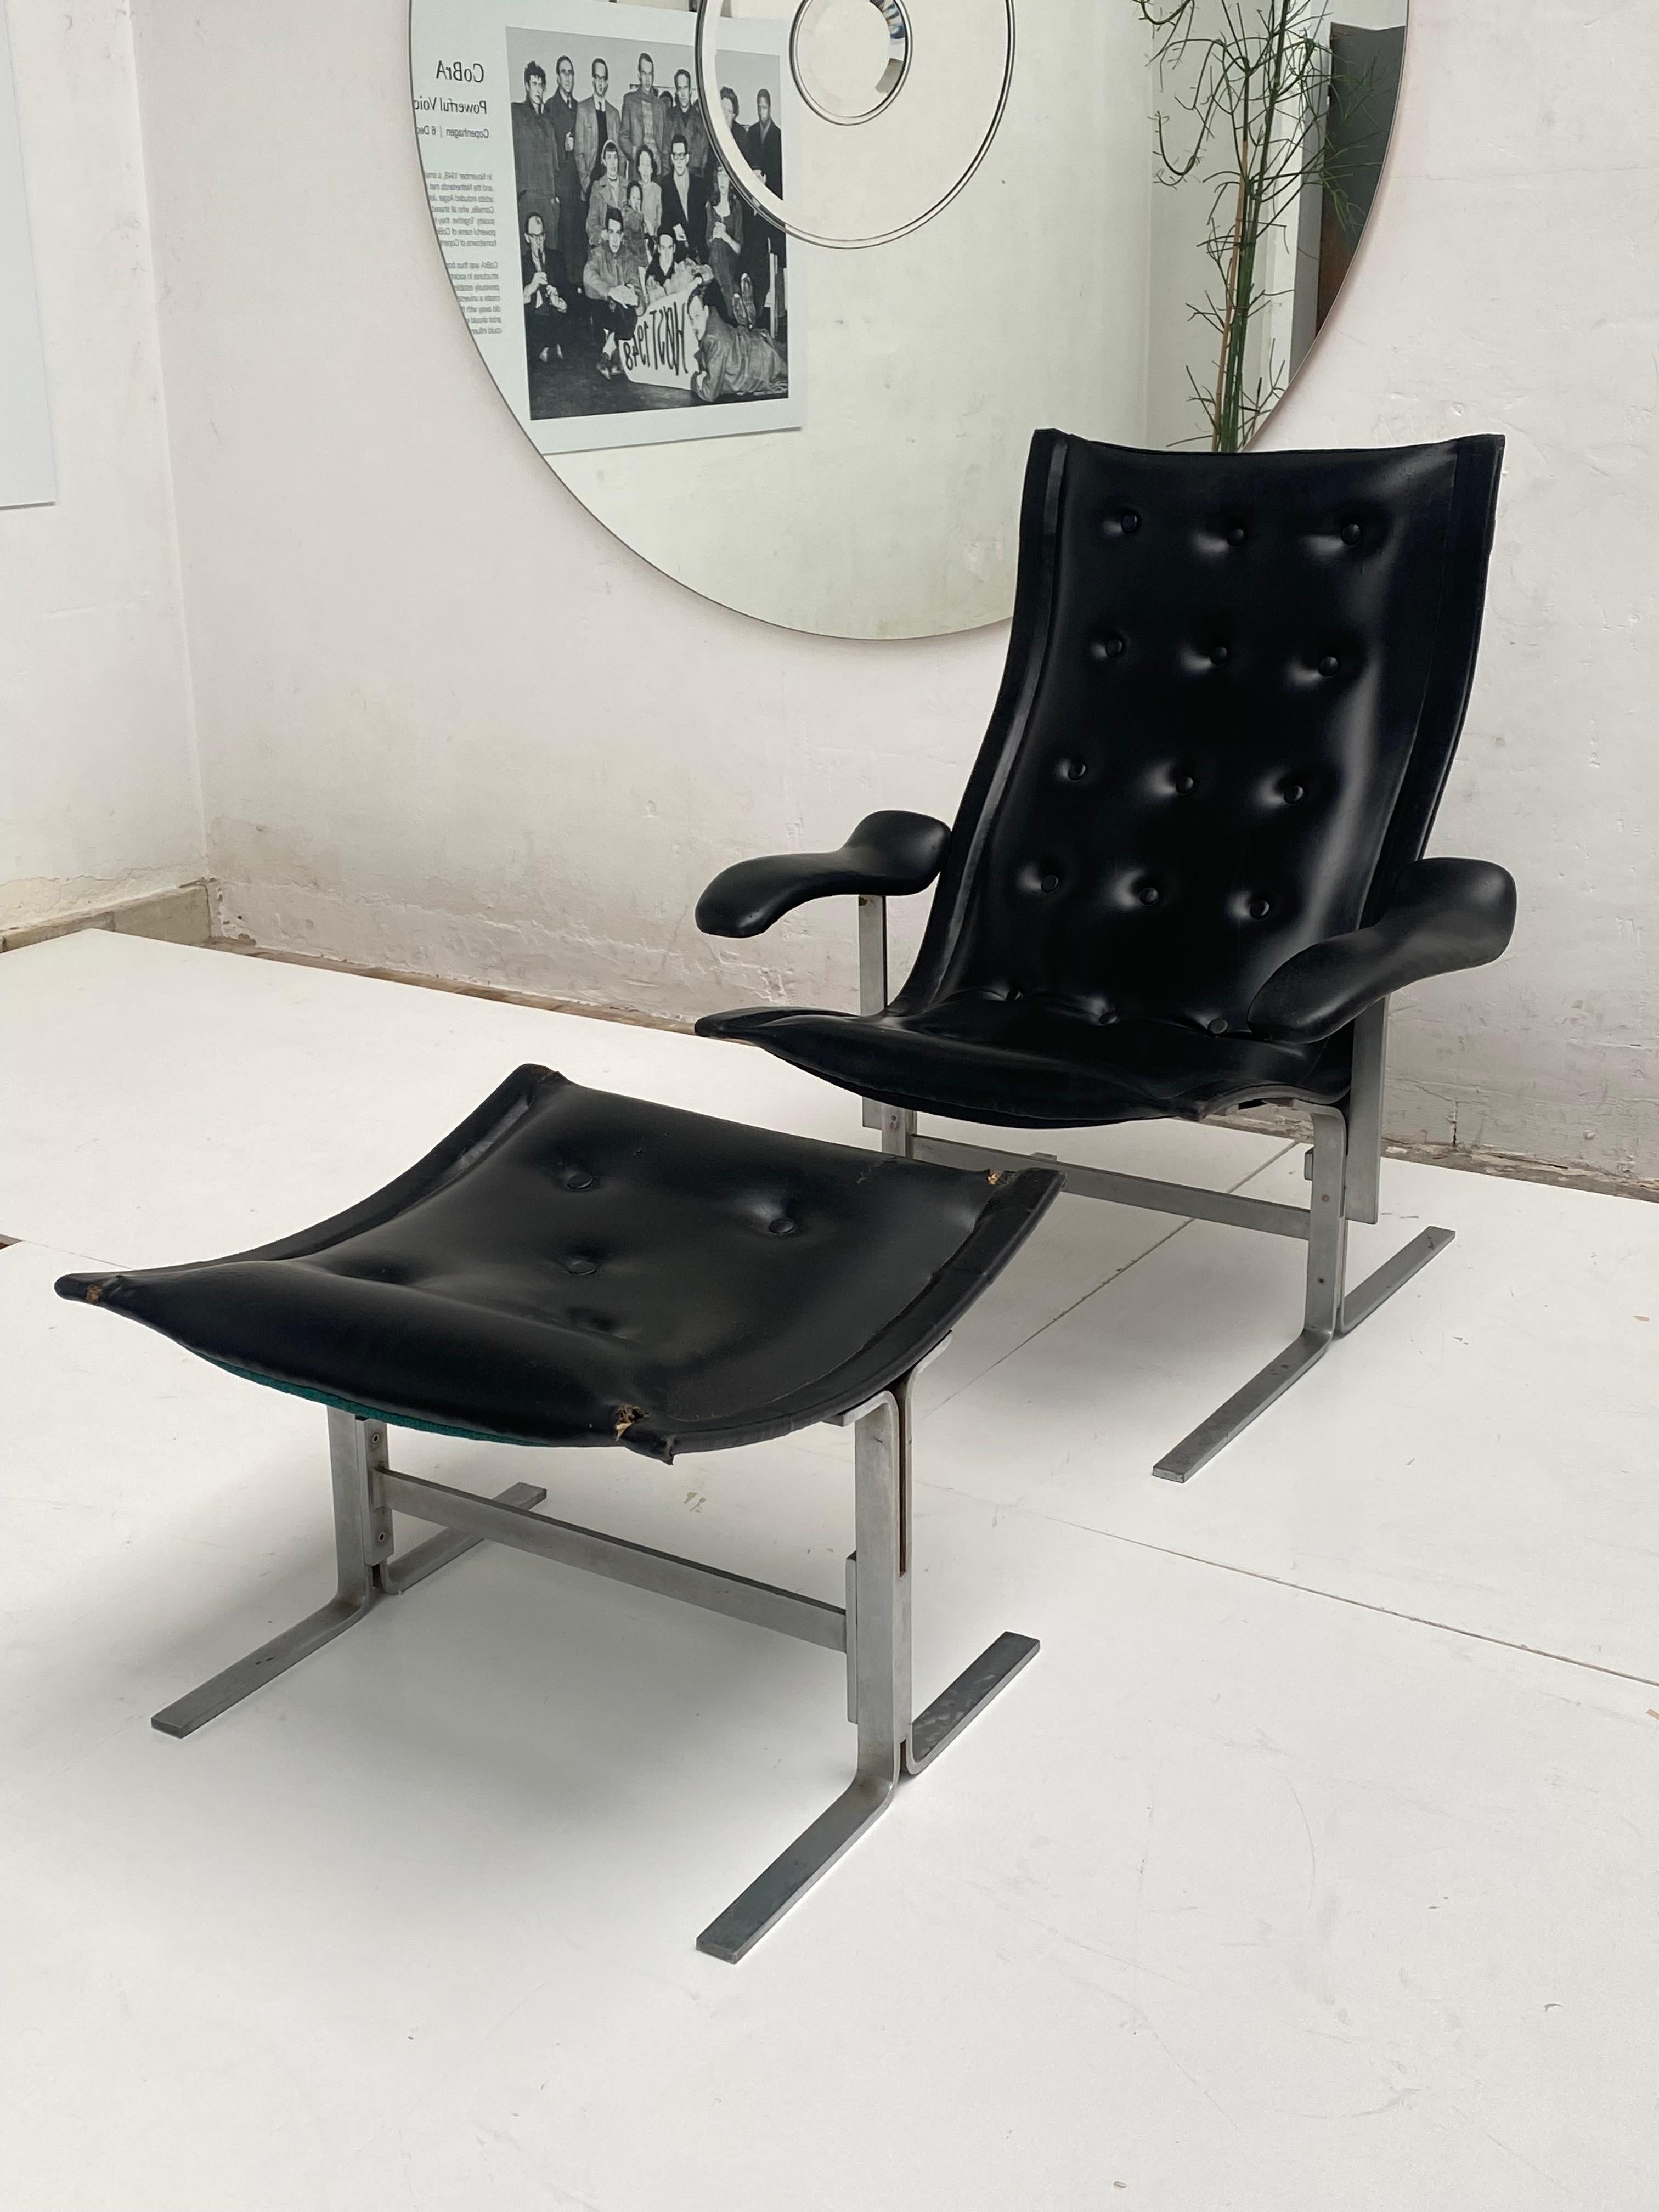 Super rare elegant lounge chair and ottoman set  from a hand crafted  edition of just two sets  that were designed  by Franco Campo in 1960 for his family and a close friend ,the lounge chair and ottoman  are both  finished in their original 